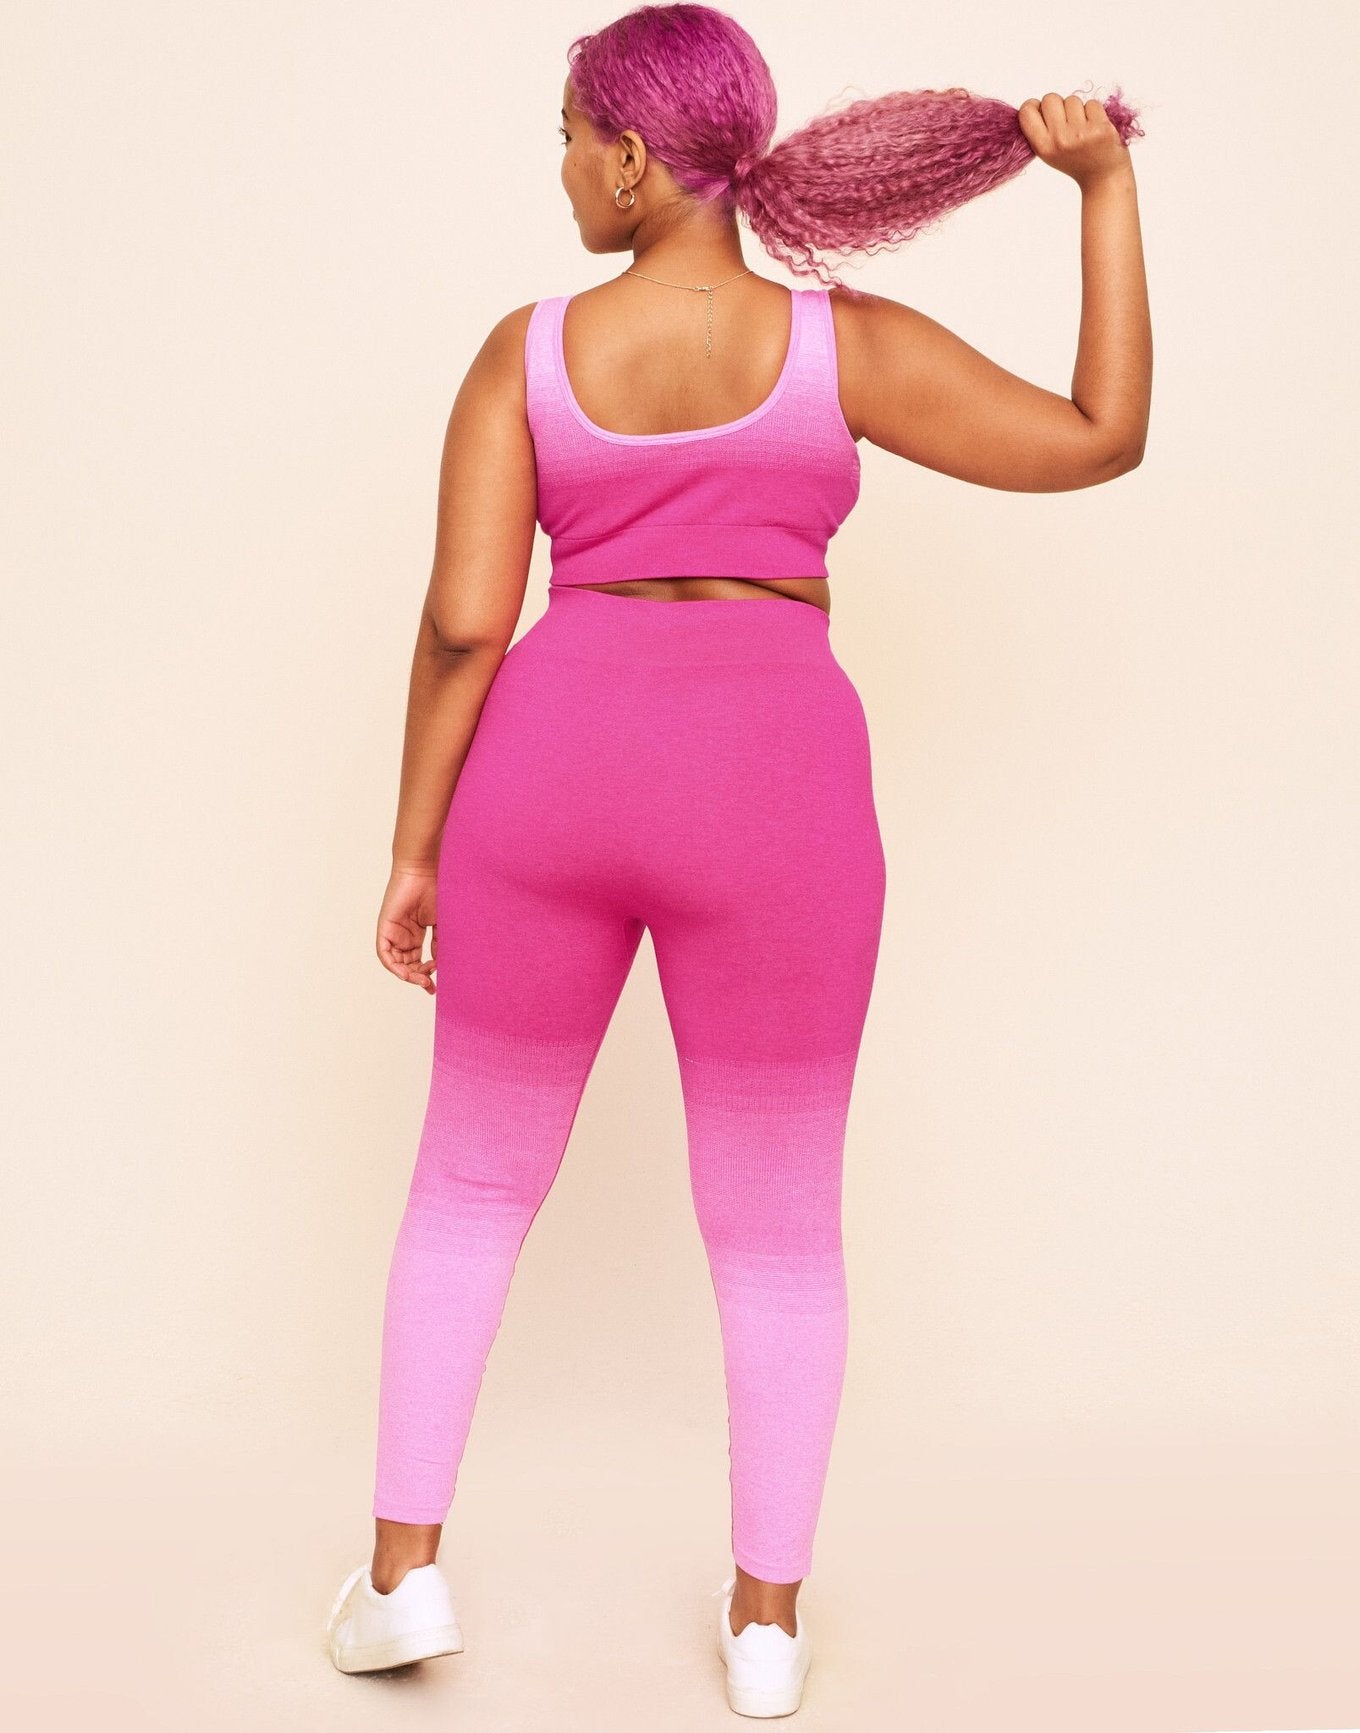 Earth Republic Lilah Ombre Full Legging Leggings in color Solid 03 - Ombre Pink and shape legging